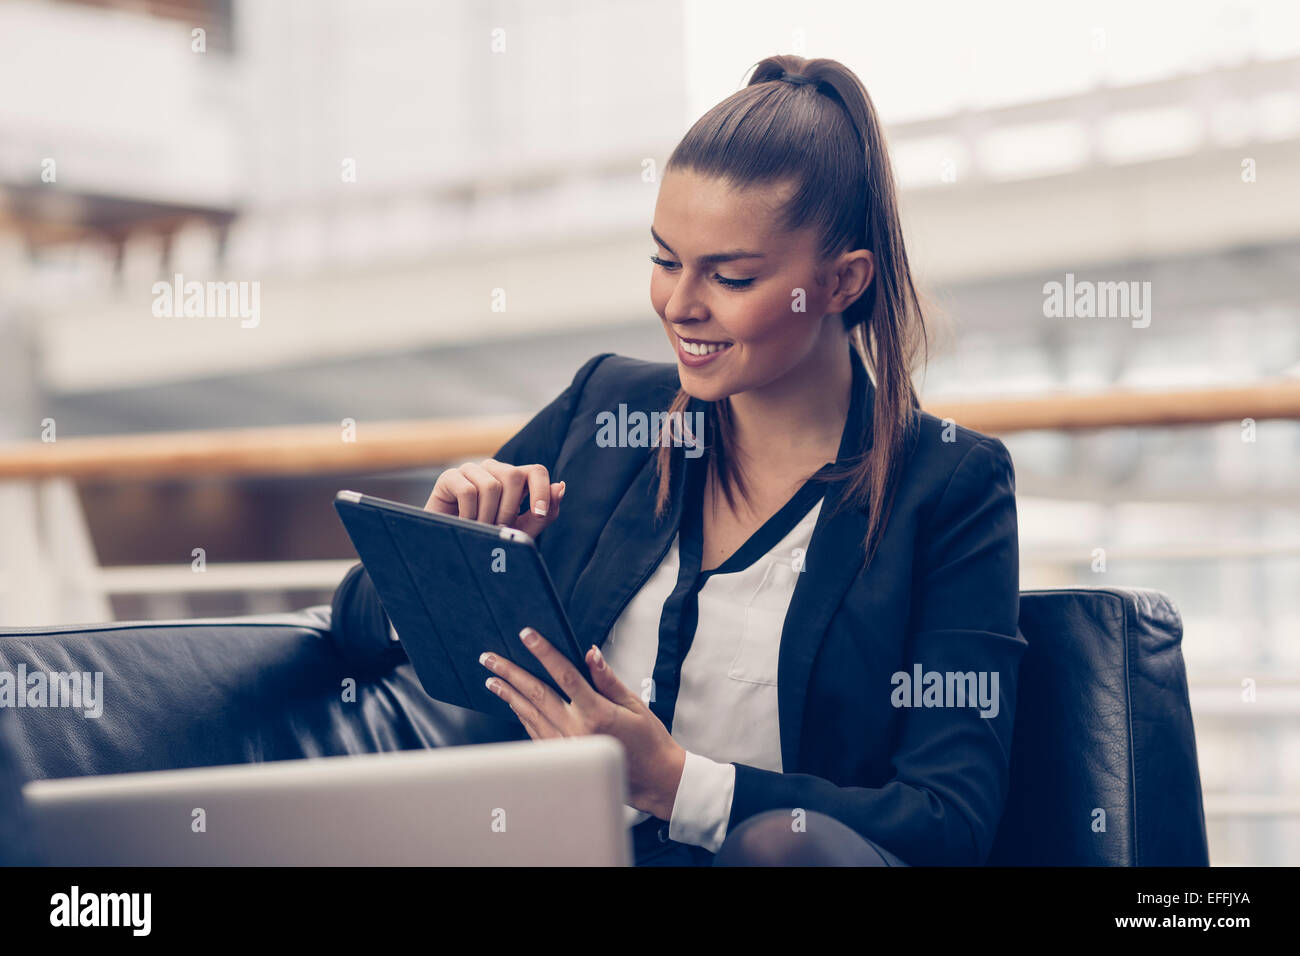 Portrait of a businesswoman with a digital tablet Stock Photo